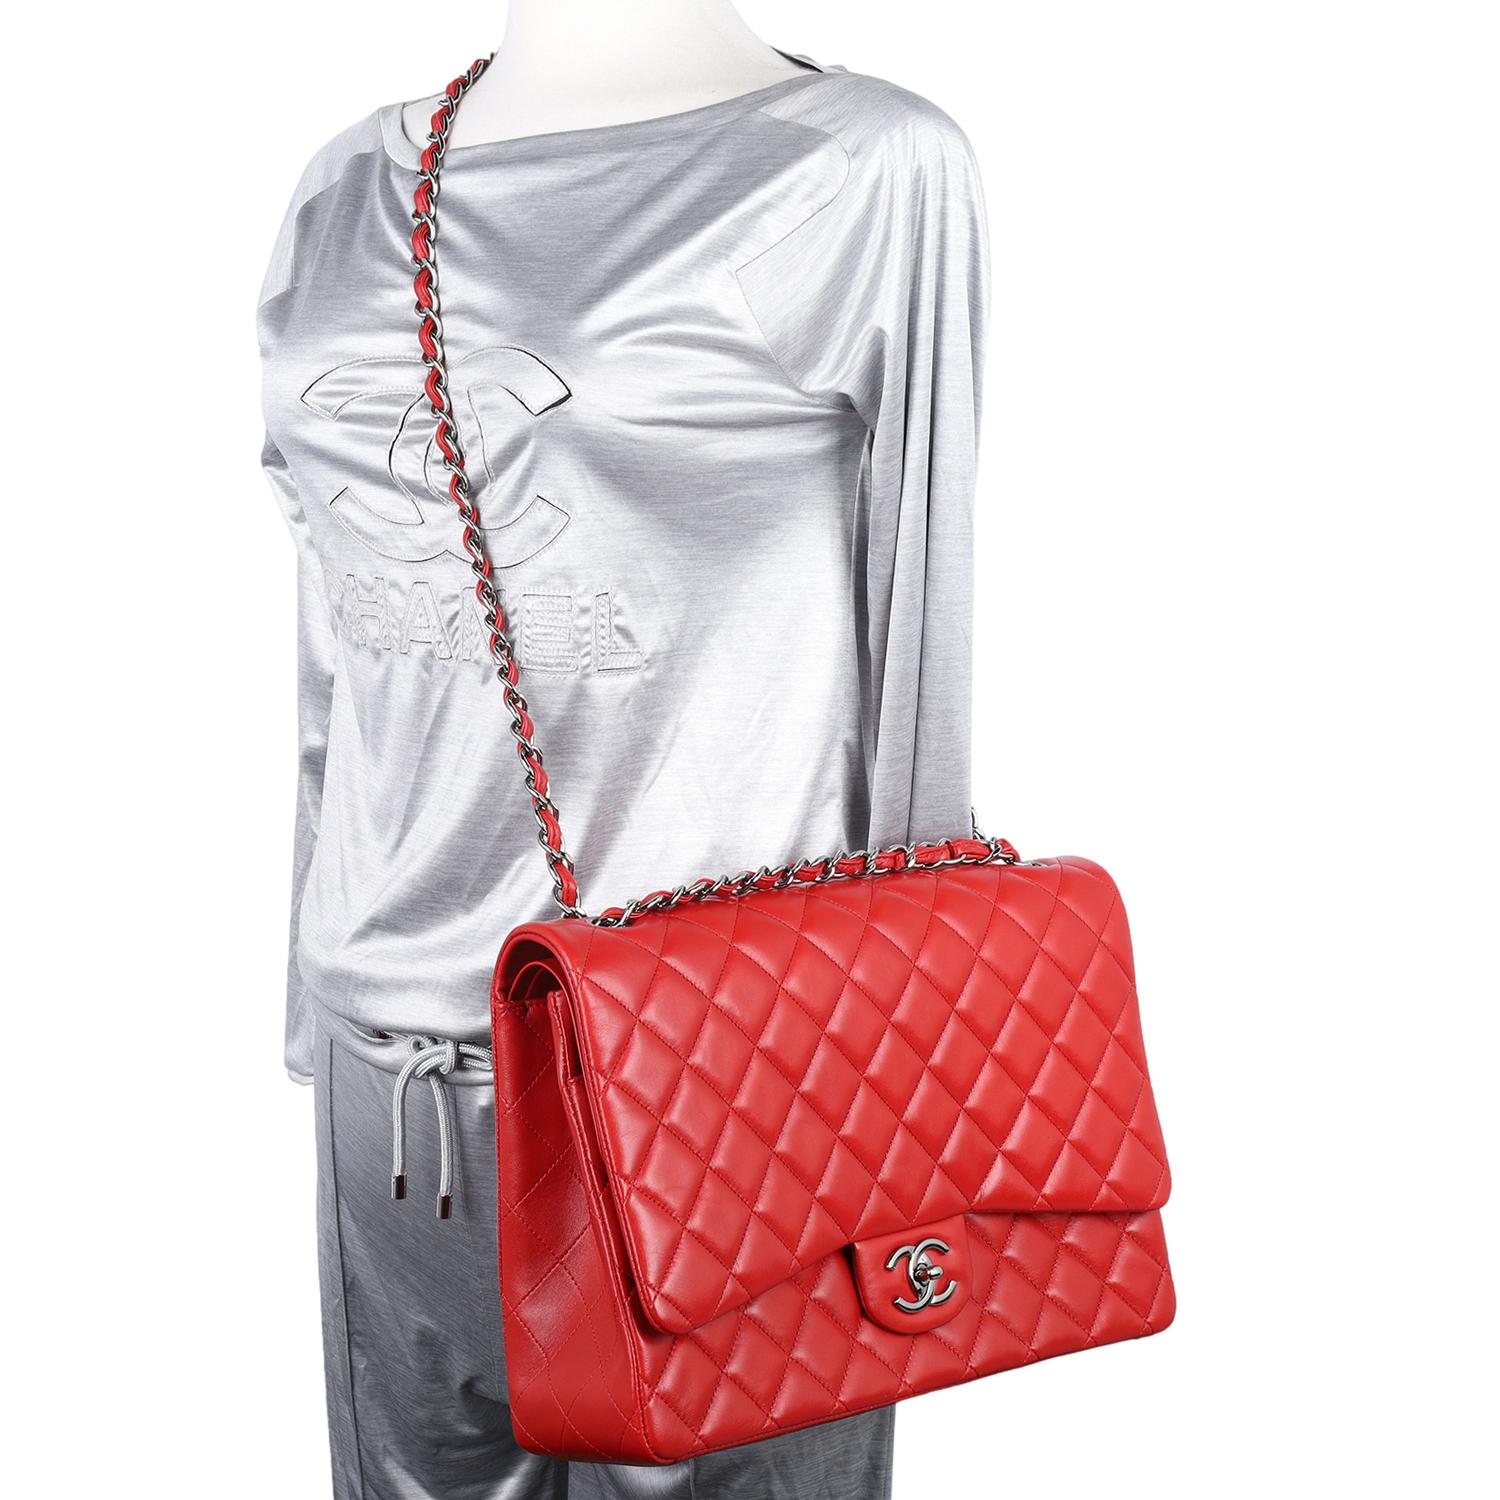 Authentic, pre-loved Chanel CC quilted Jumbo classic double flap bag in red. Features flap top with famous CC twist turn lock on the front of the bag, the exterior rear has 1 open side pocket, the interior has Chanel red leather lining double flap